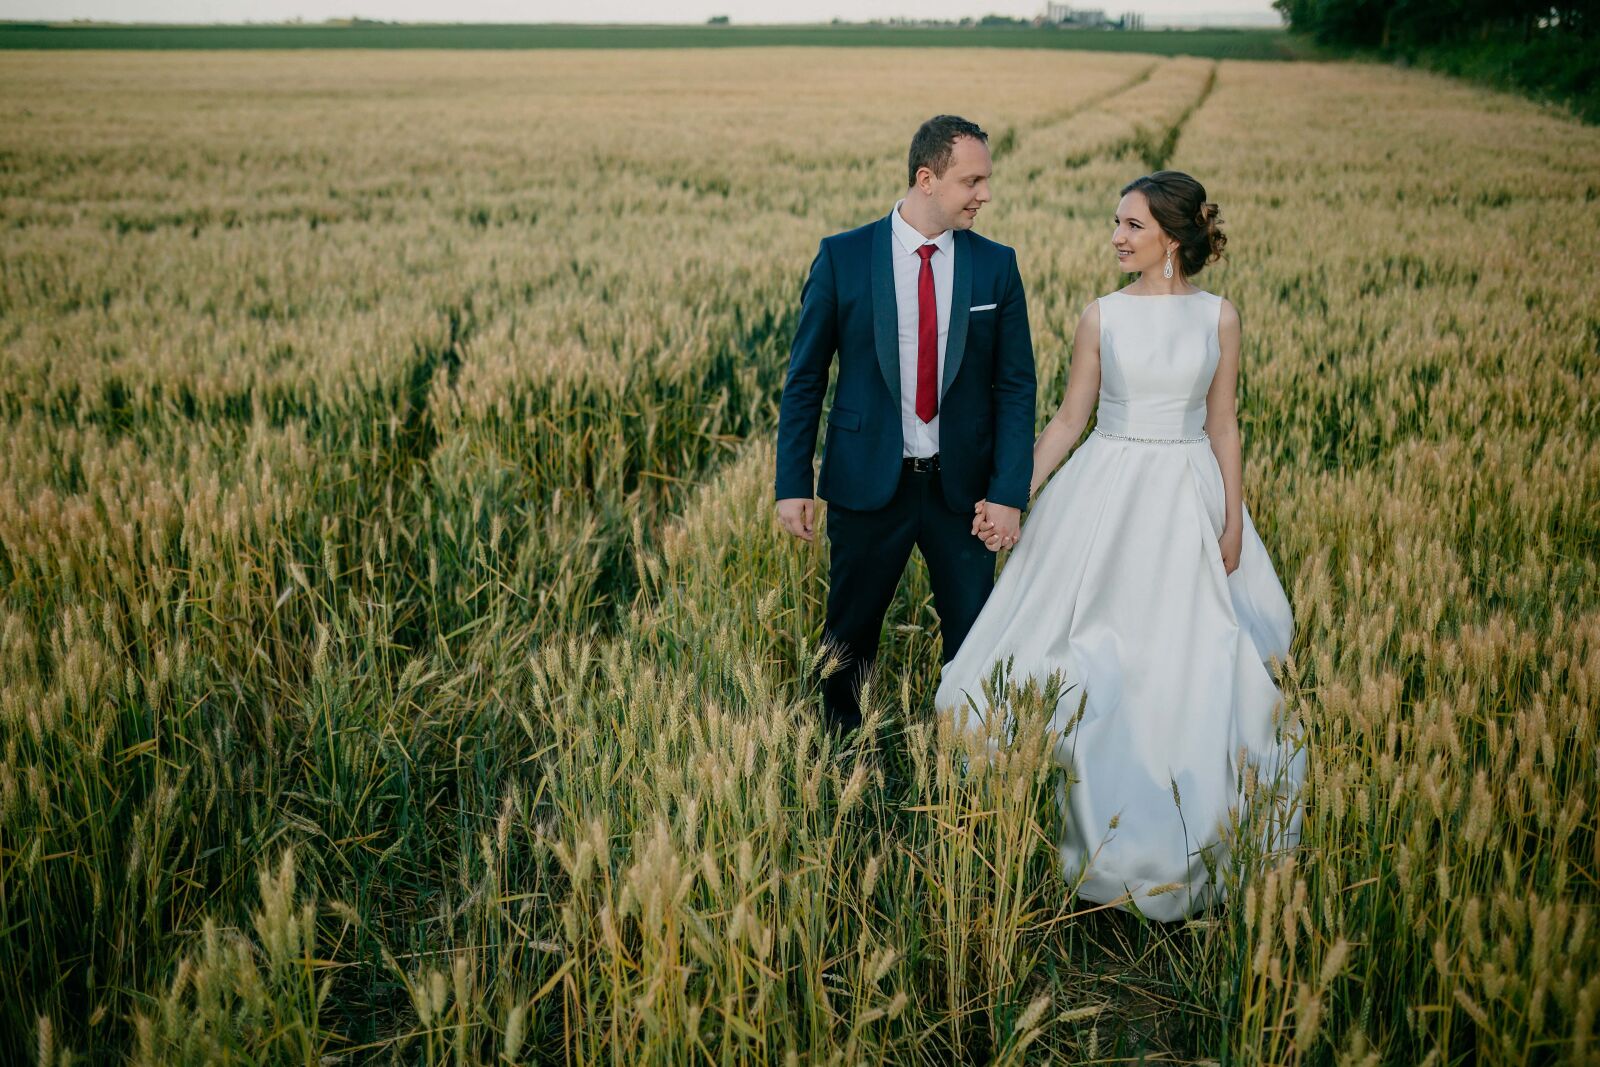 Sigma 35mm F1.4 DG HSM Art sample photo. Field, agriculture, groom, wheatfield photography